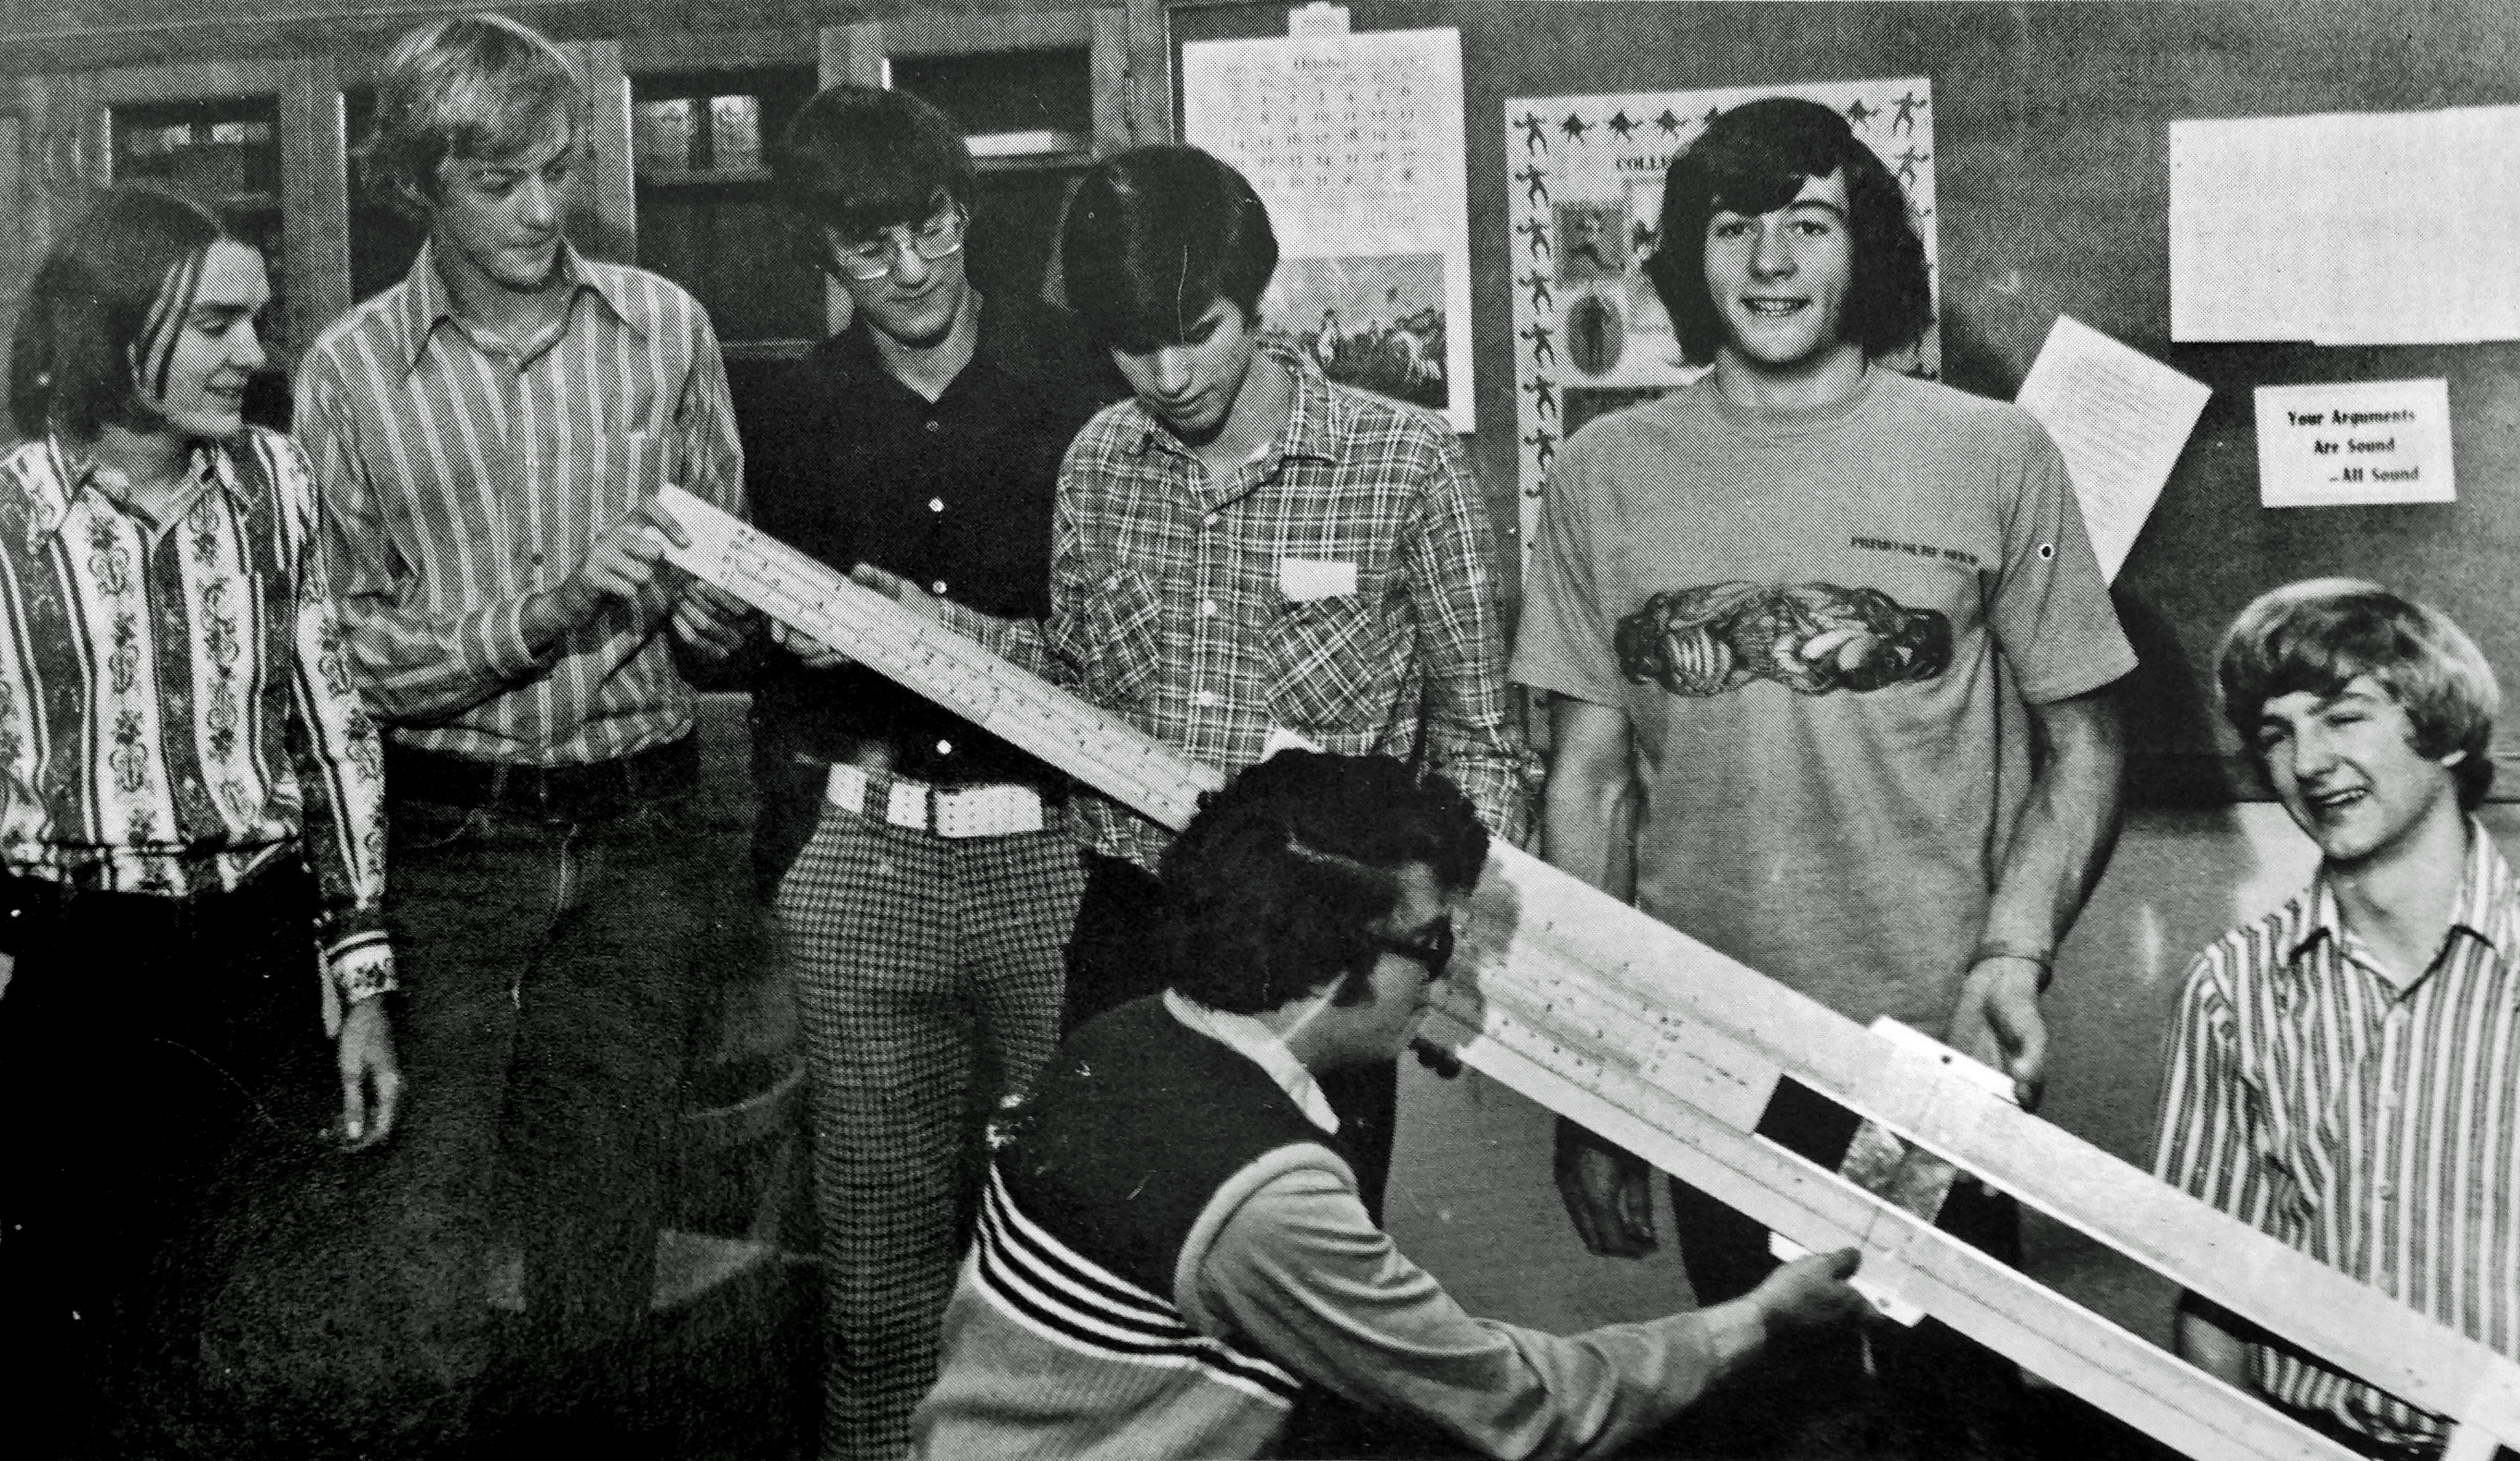 National Merit students with slide rule